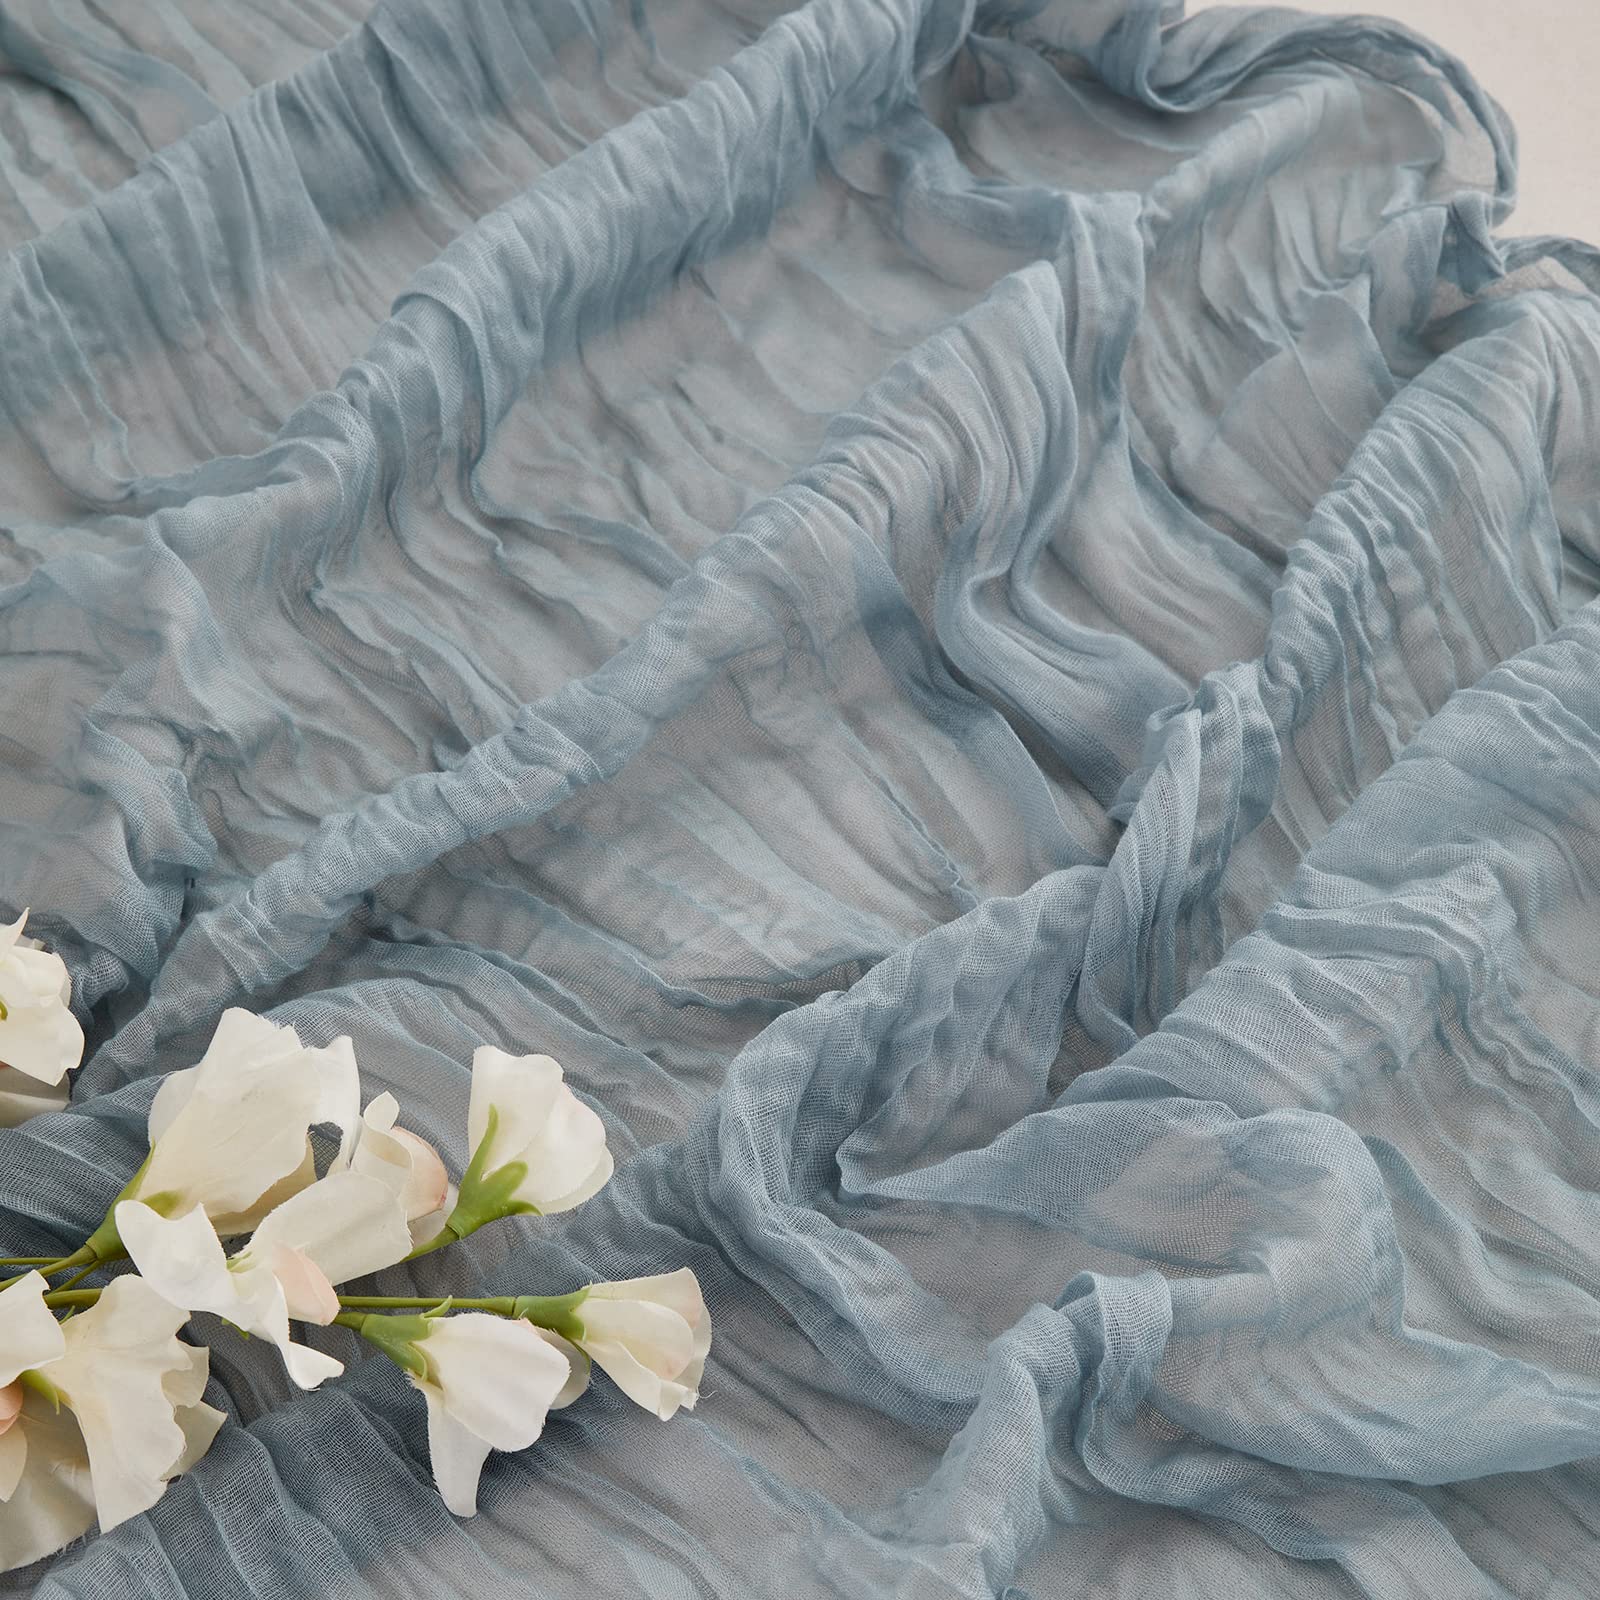 10 Pack Cheesecloth Table Runner - 13.3Ft Dusty Blue Boho Gauze Cheese Cloth Table Runner 35x160 Inch Long Romantic Sheer Table Runner for Wedding Bridal Baby Shower Birthday Party Table Decoration